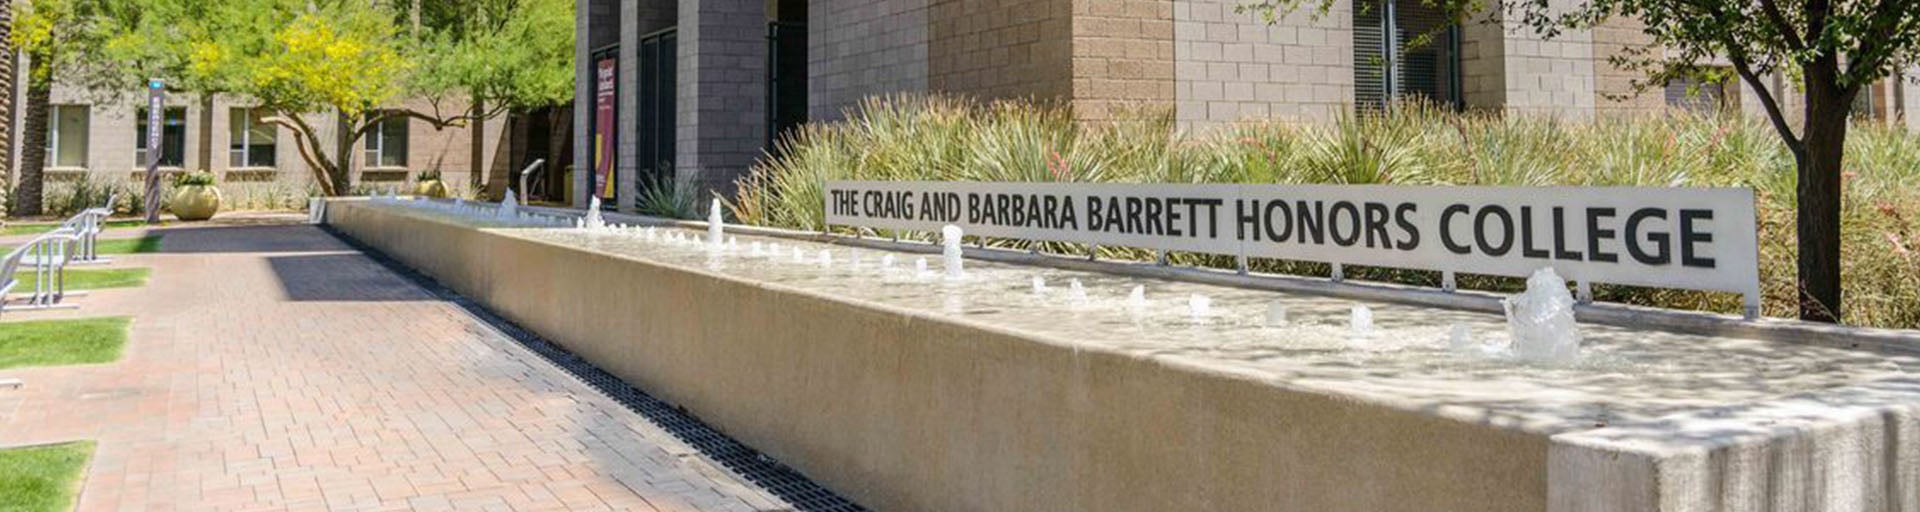 Barrett, The Honors College fountain in front of Tempe complex